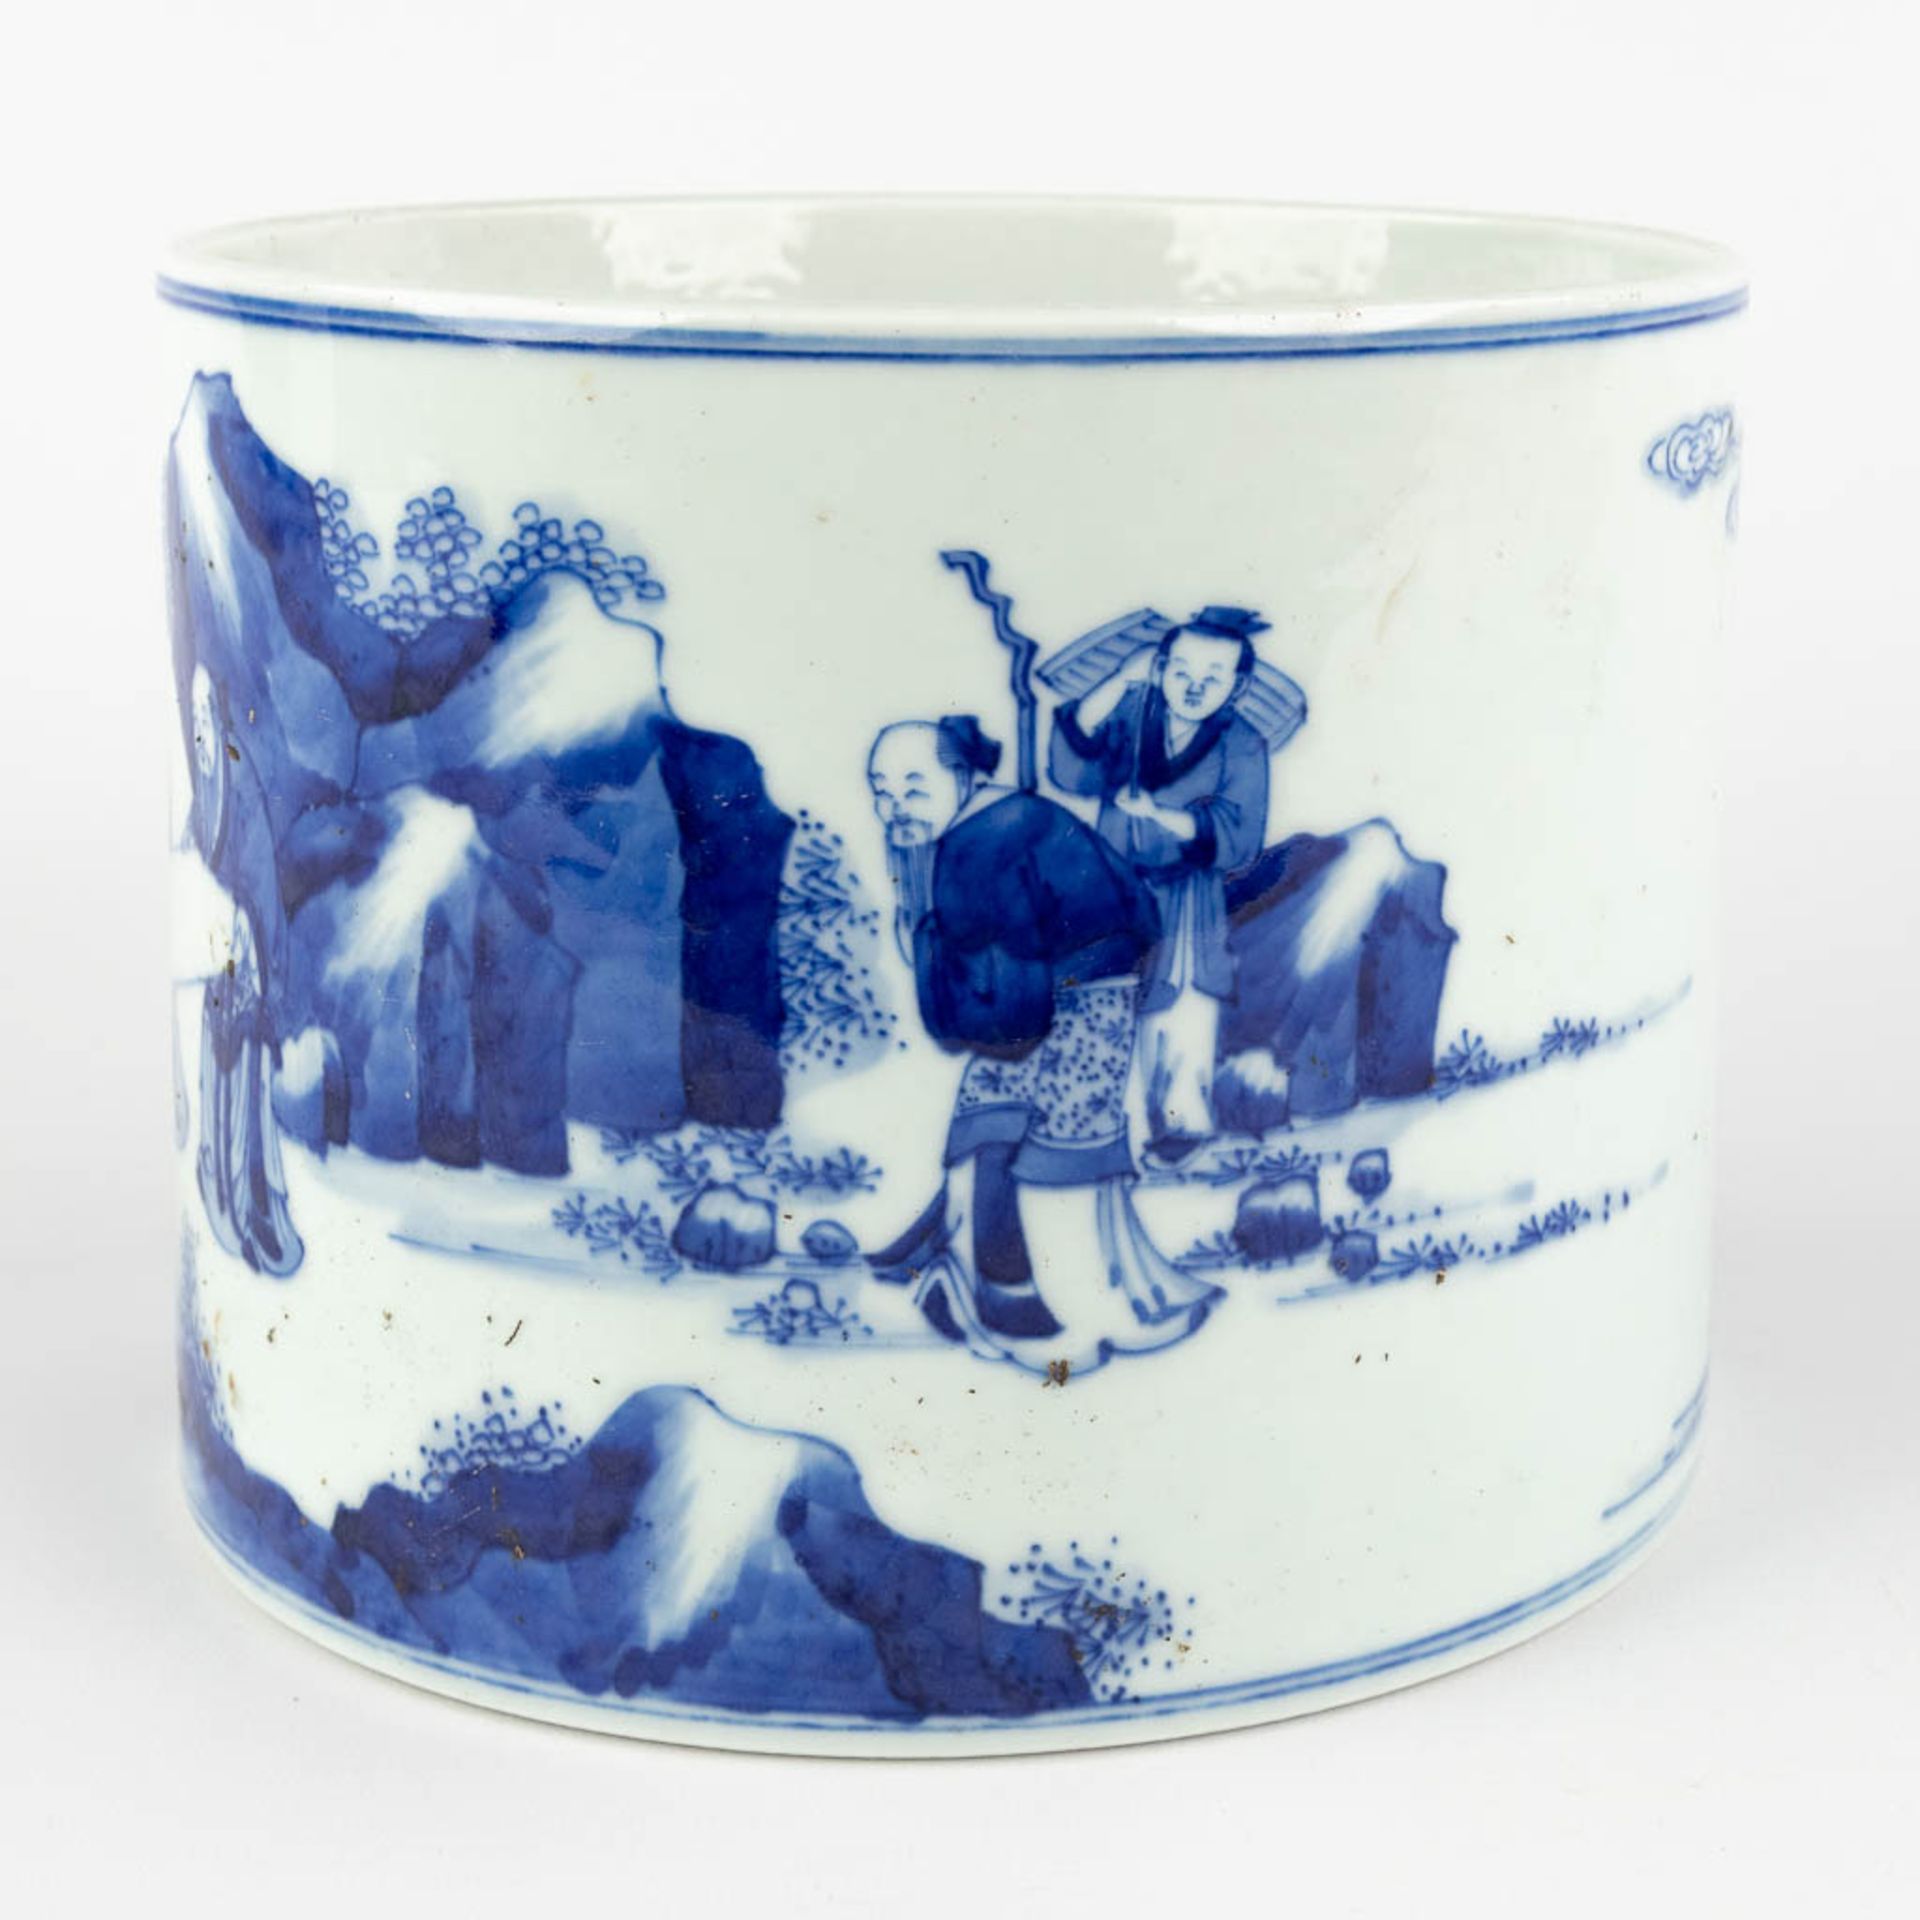 A Chinese pot, blue-white decor of wise men holding a cloth, 19th C. (H:15,5 x D:20 cm) - Image 7 of 12